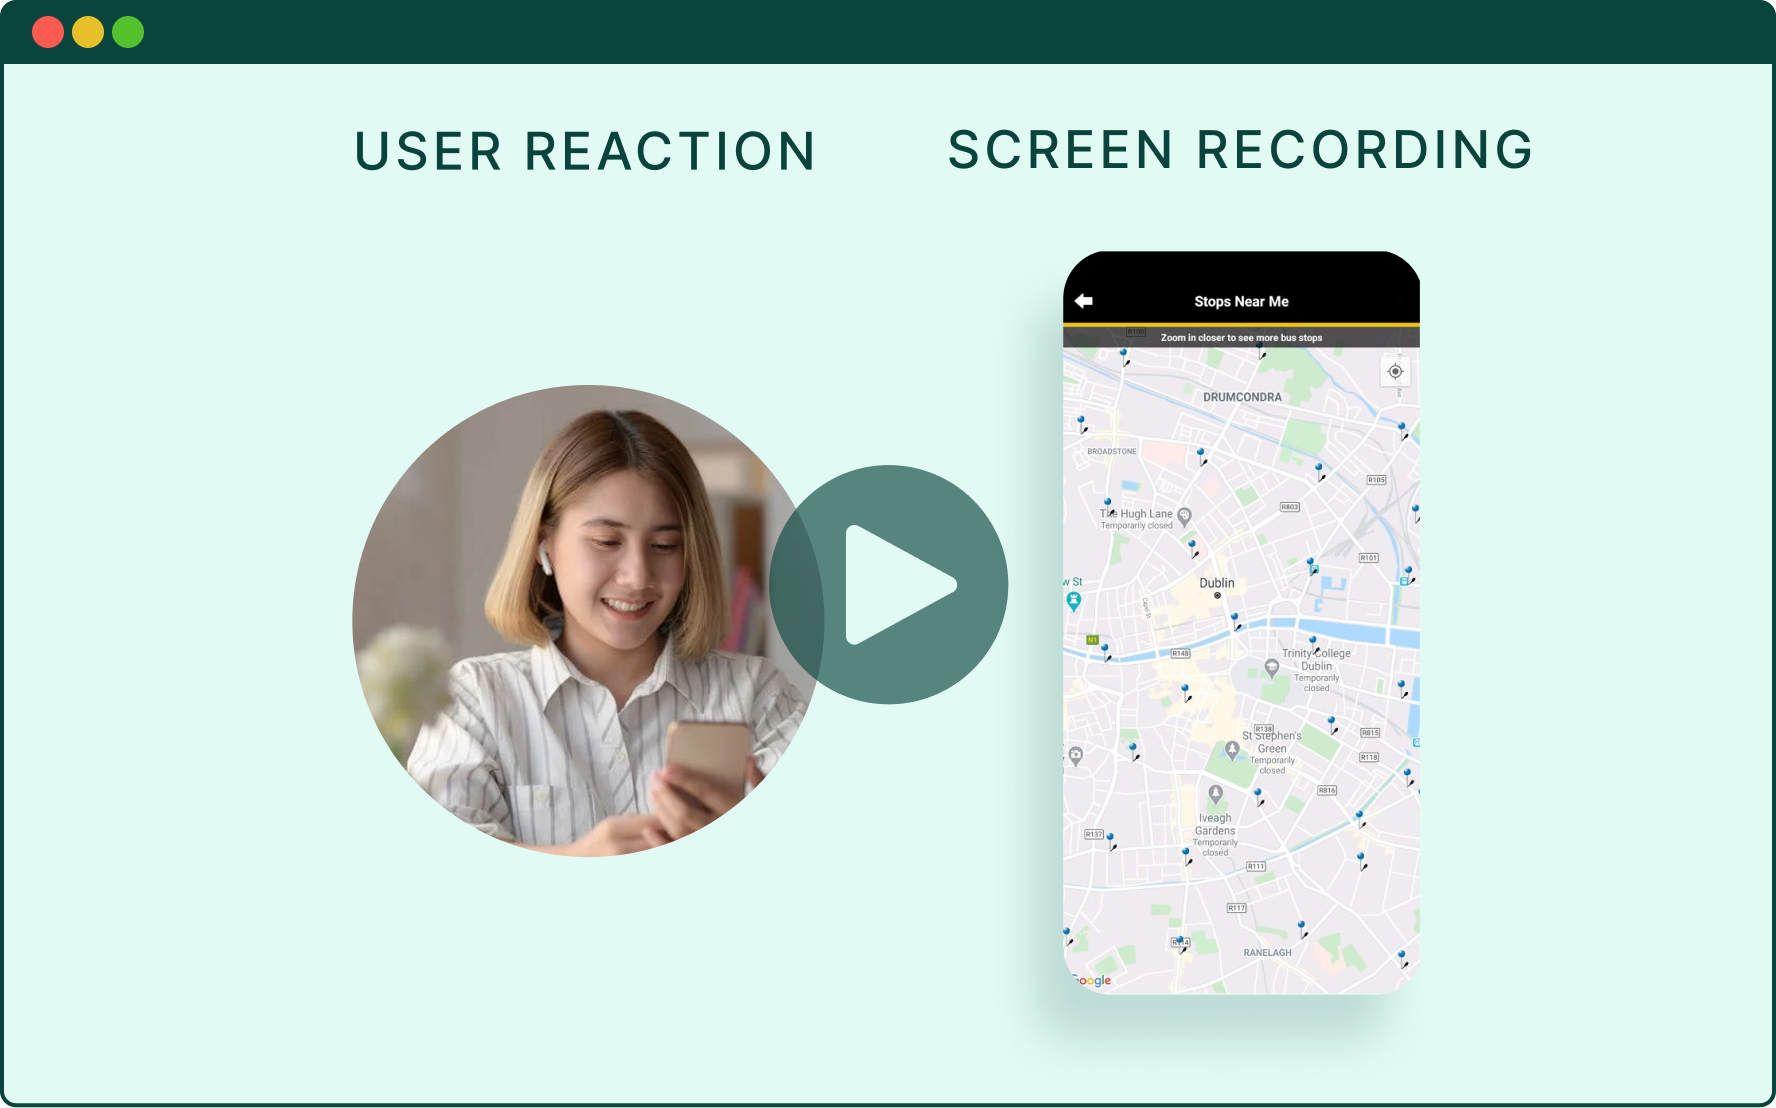 A screenshot of a video player. On the left in the video, titled "user reaction" — a woman using a phone as part of a user research observation task. On the right in the video, titled "screen recording" — is a synchronised recording of the phone screen that the woman is using.